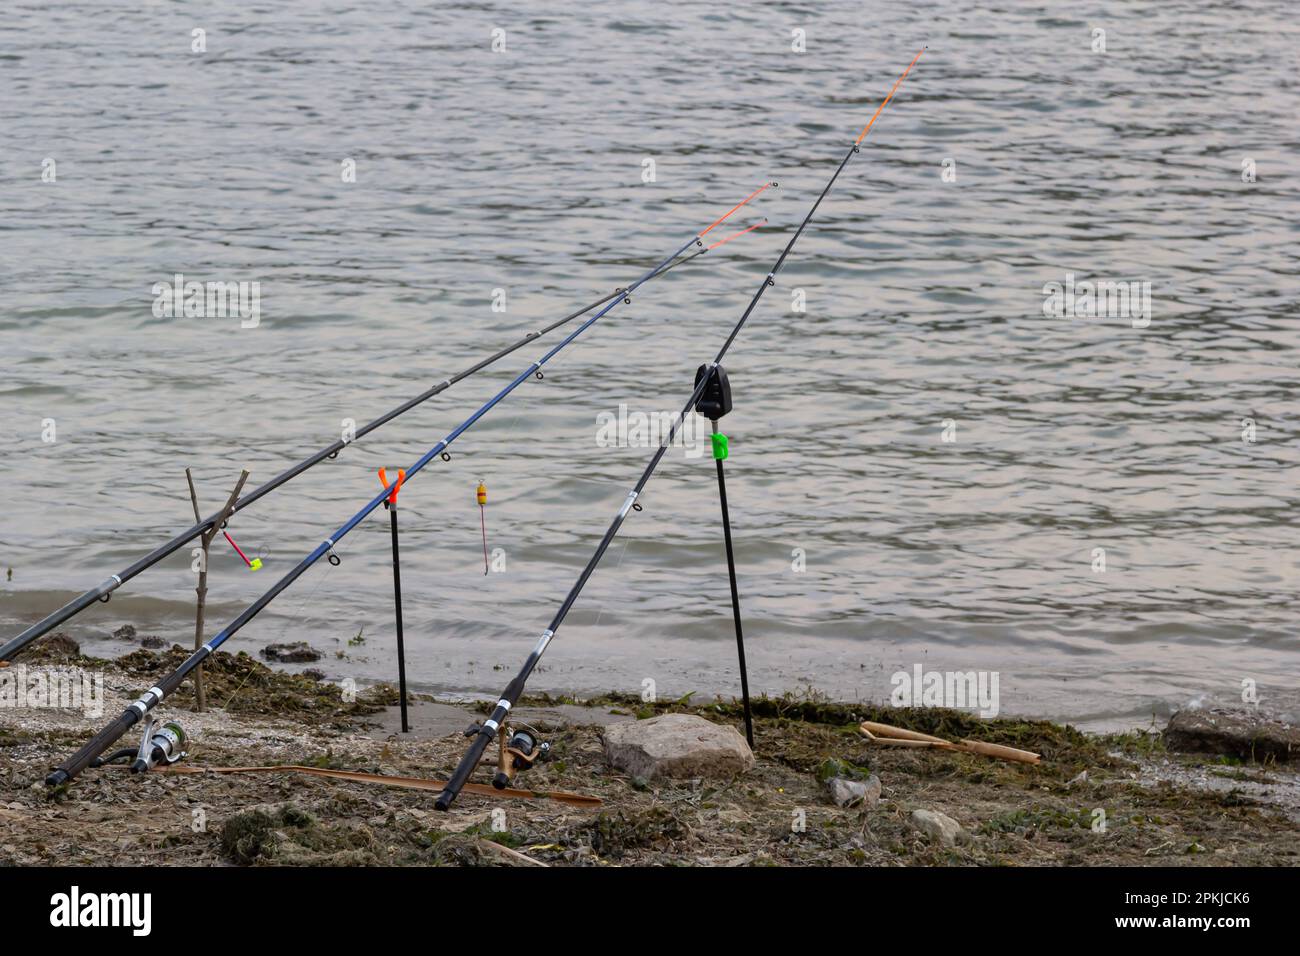 Fishing rods and fishing gear on the river bank, lake coast close